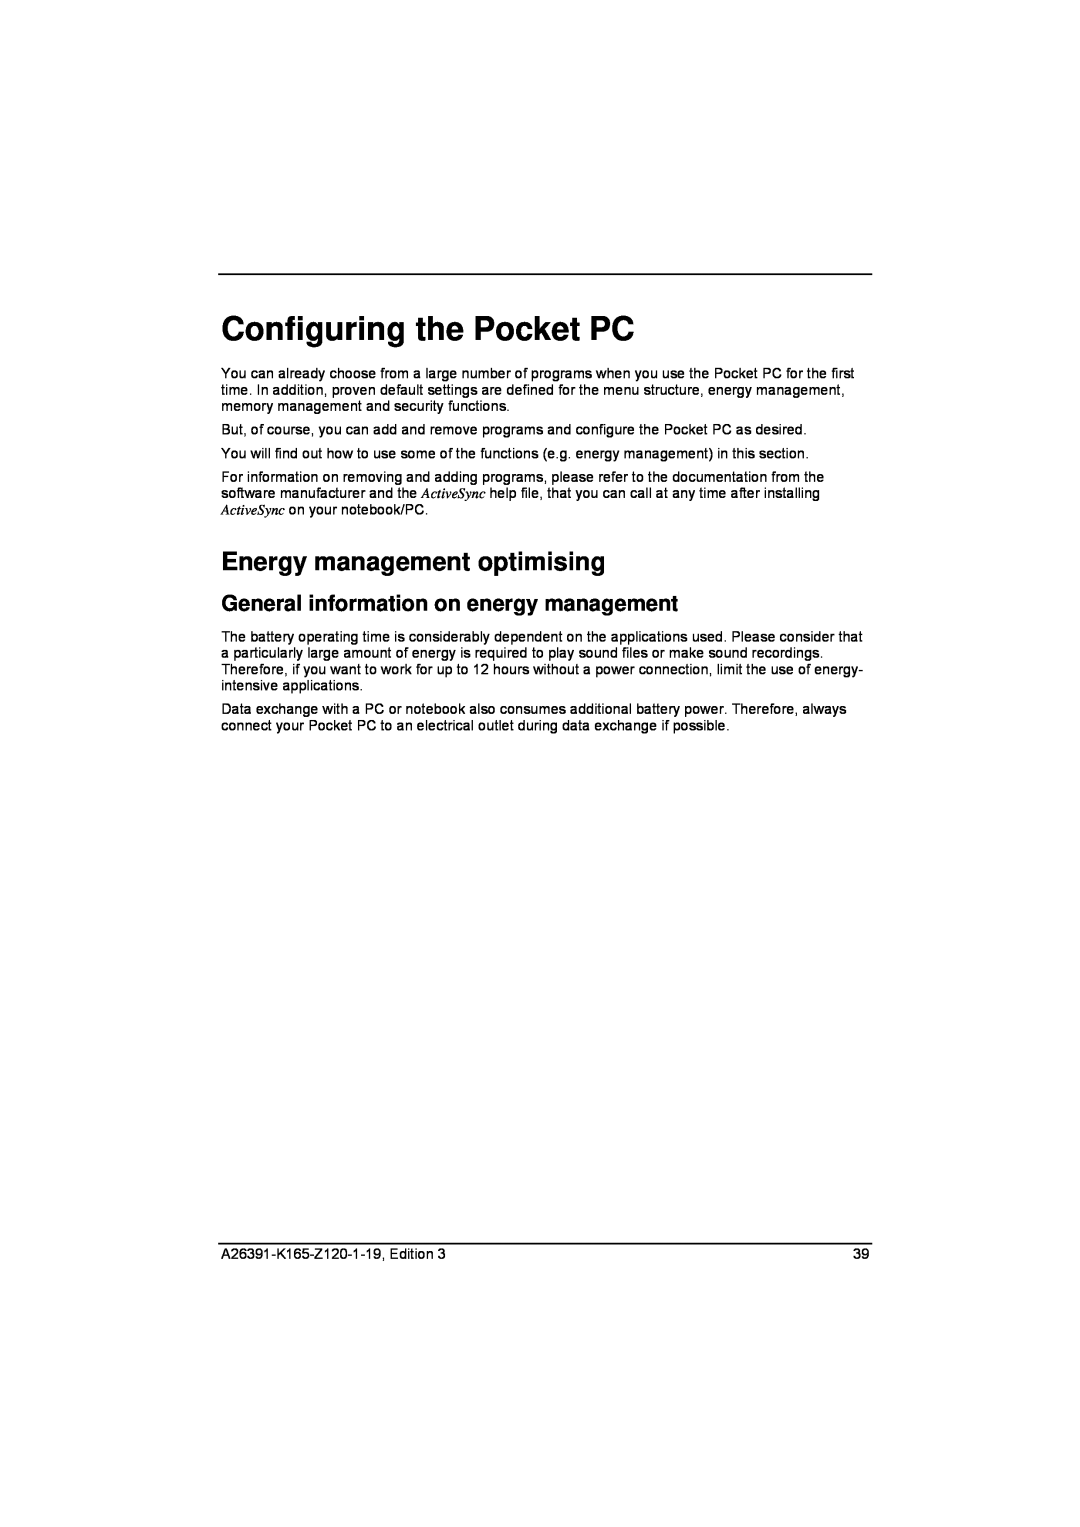 Zweita  Co N/C Series Configuring the Pocket PC, Energy management optimising, General information on energy management 